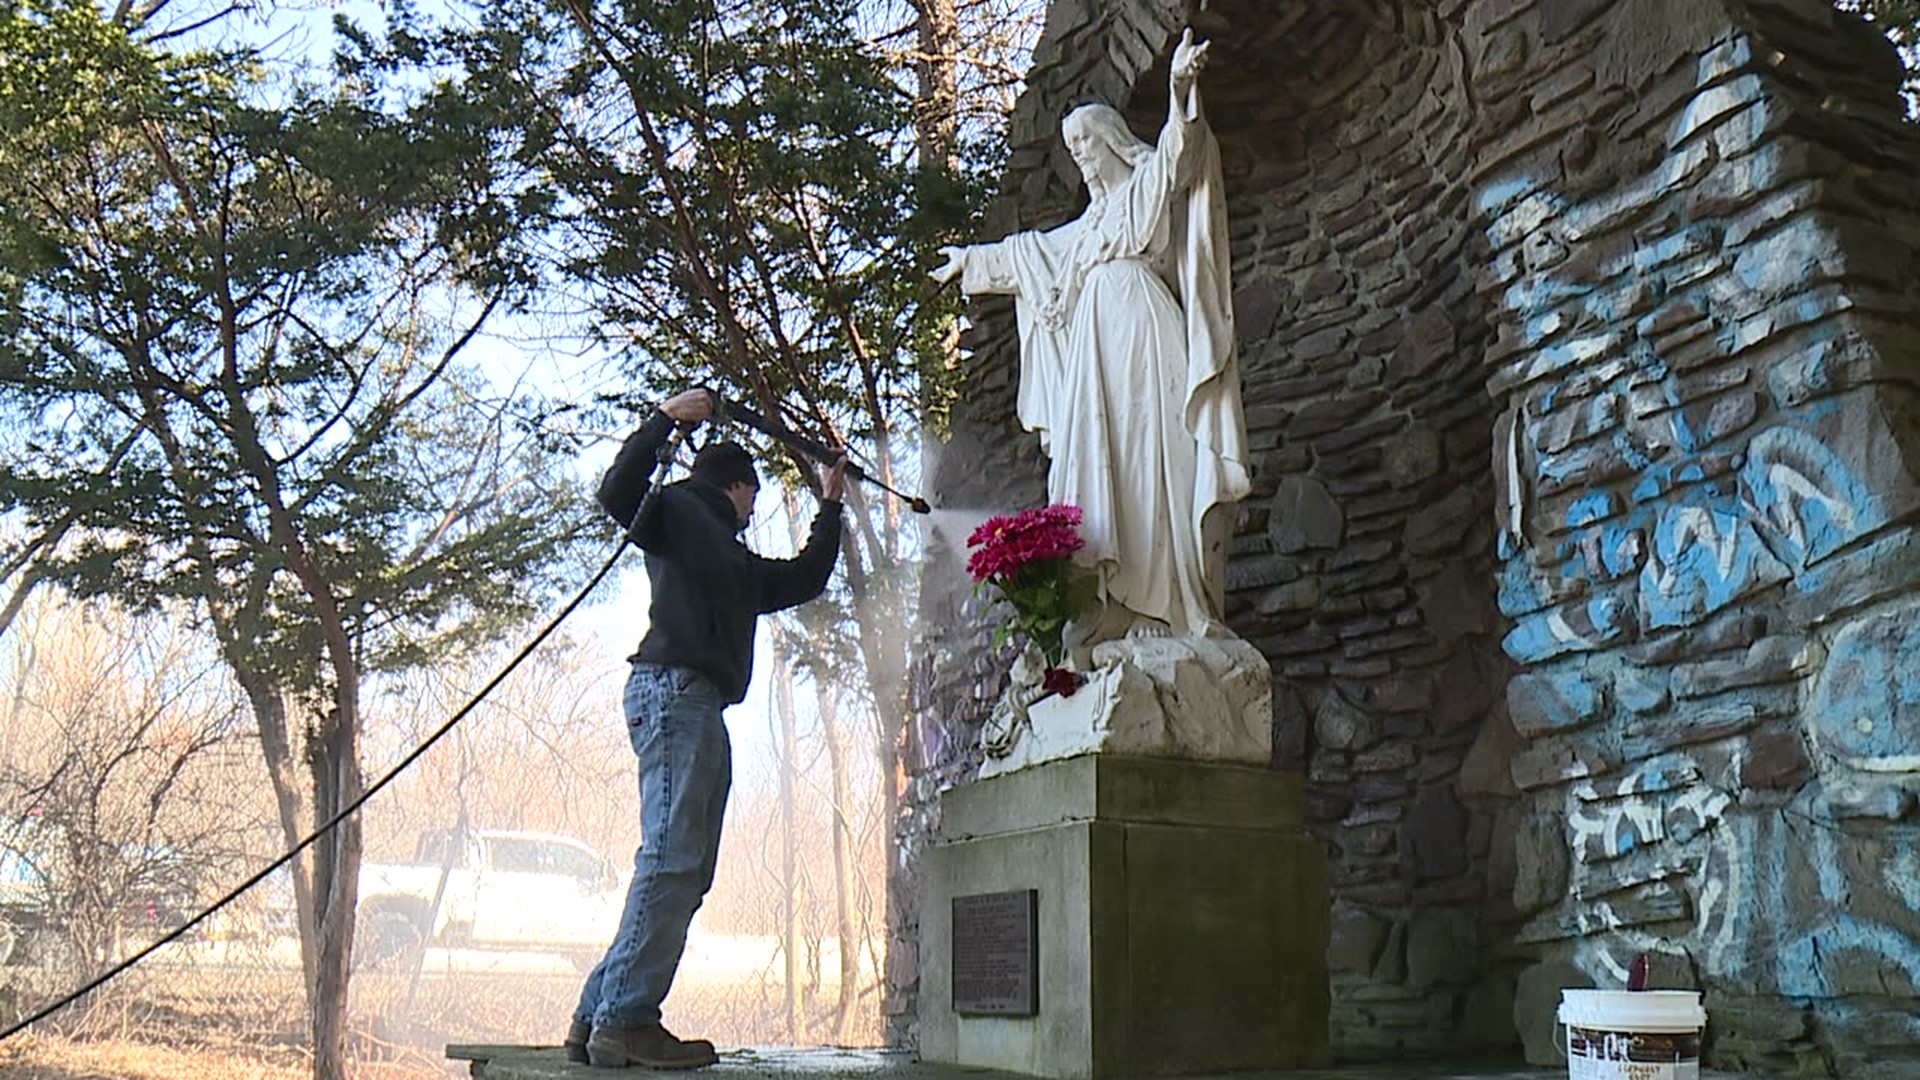 The vandalism on the statue was discovered and reported to police on Monday morning, but faith in the community was restored to those who own the property.